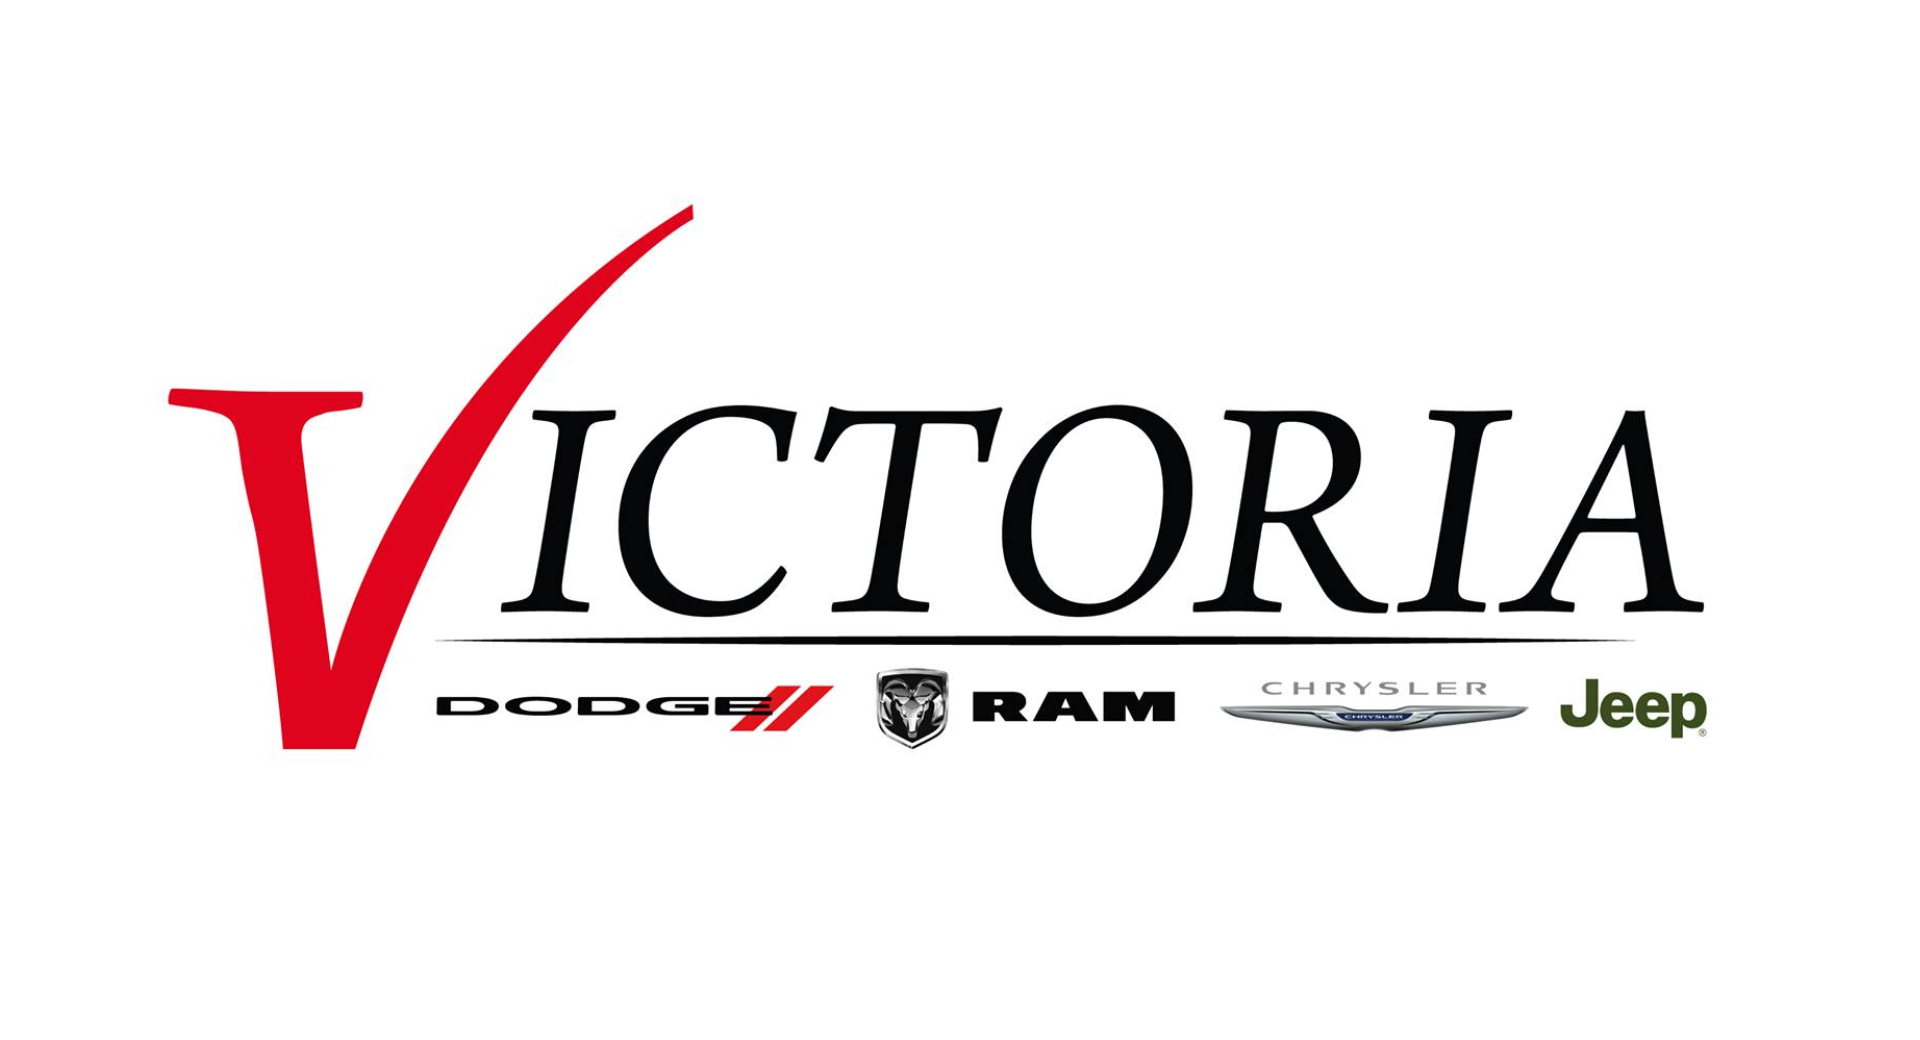 Victoria CDJR is a Certified Agriculture Dealership